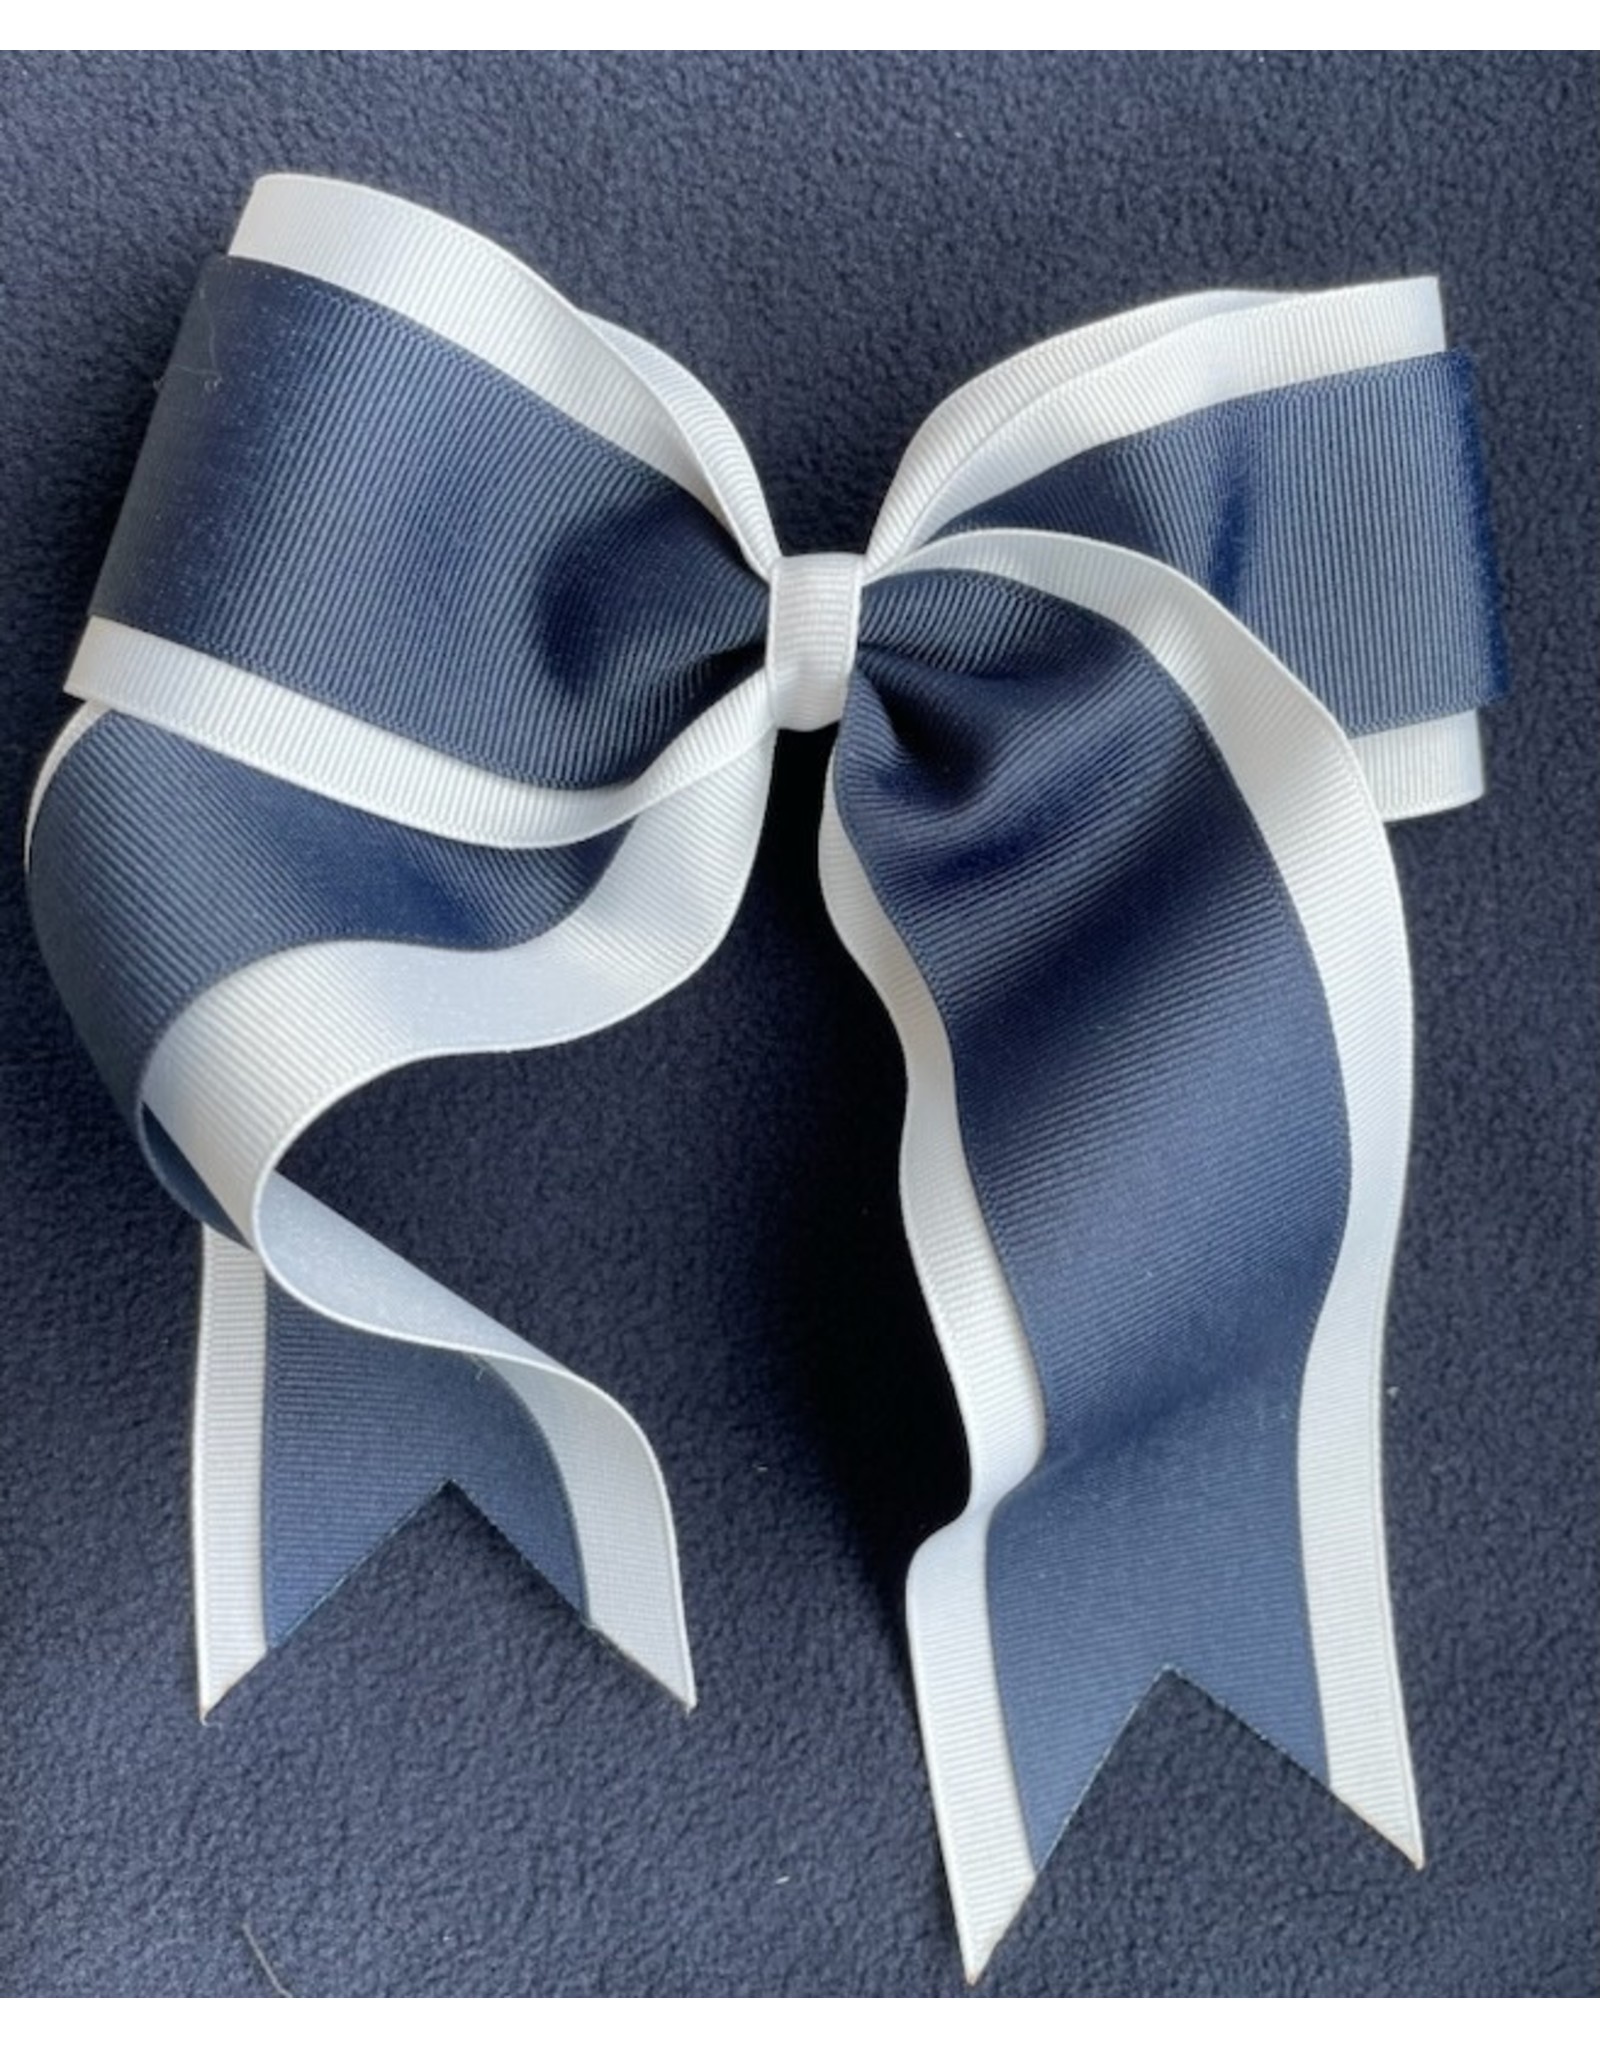 NON-UNIFORM 6" Tailored Cheer Bow, White with Navy